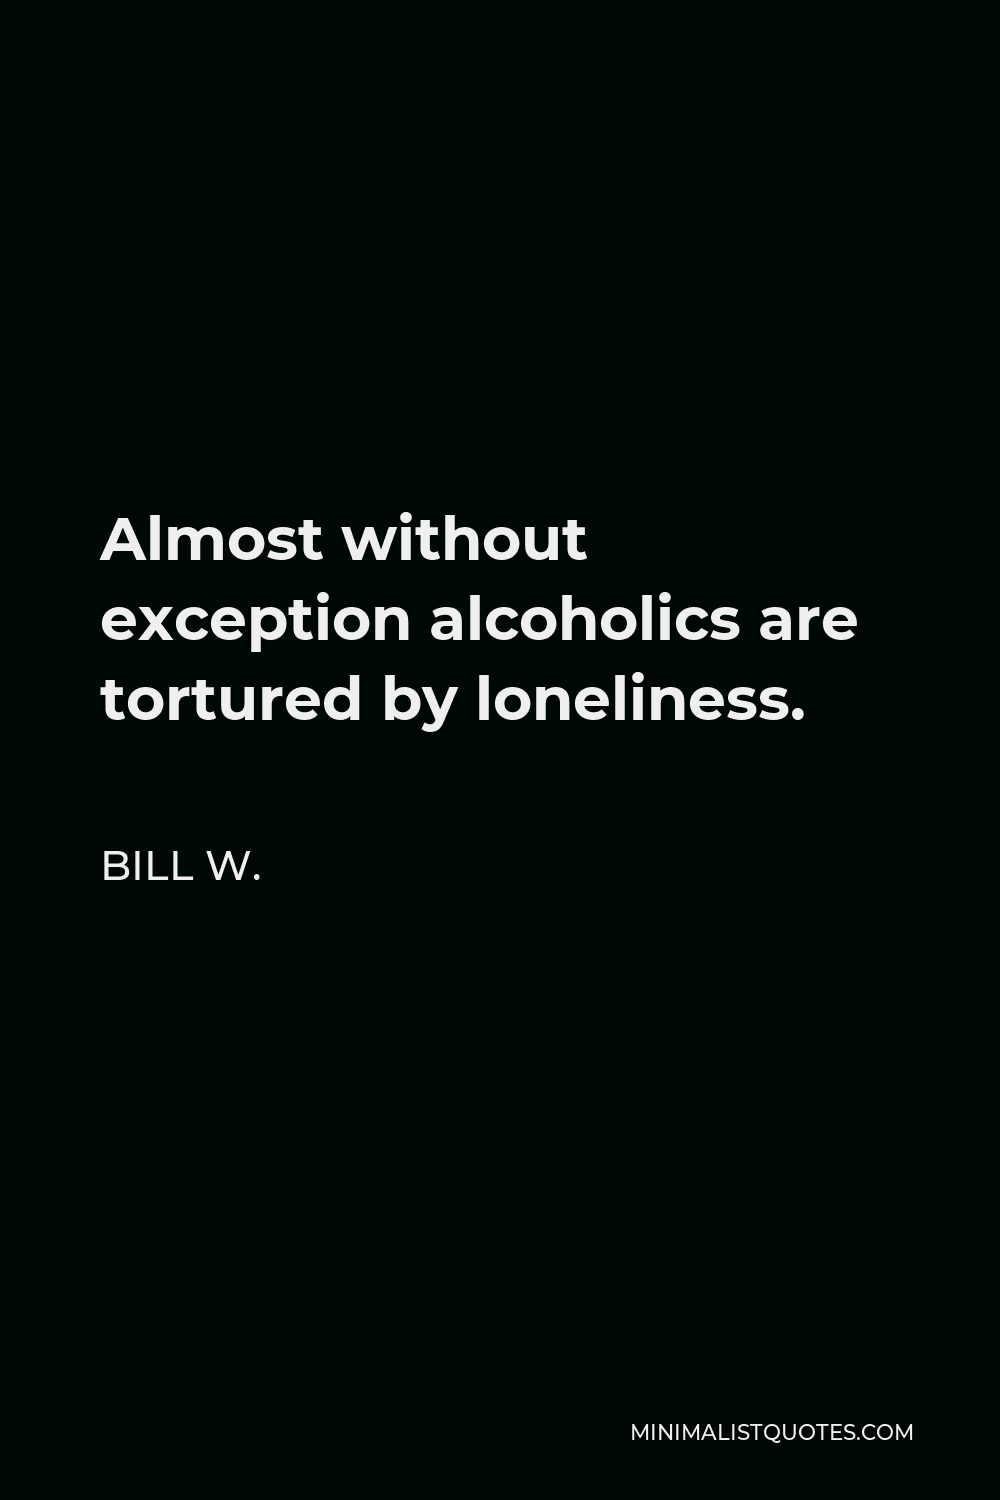 Bill W. Quote - Almost without exception alcoholics are tortured by loneliness.